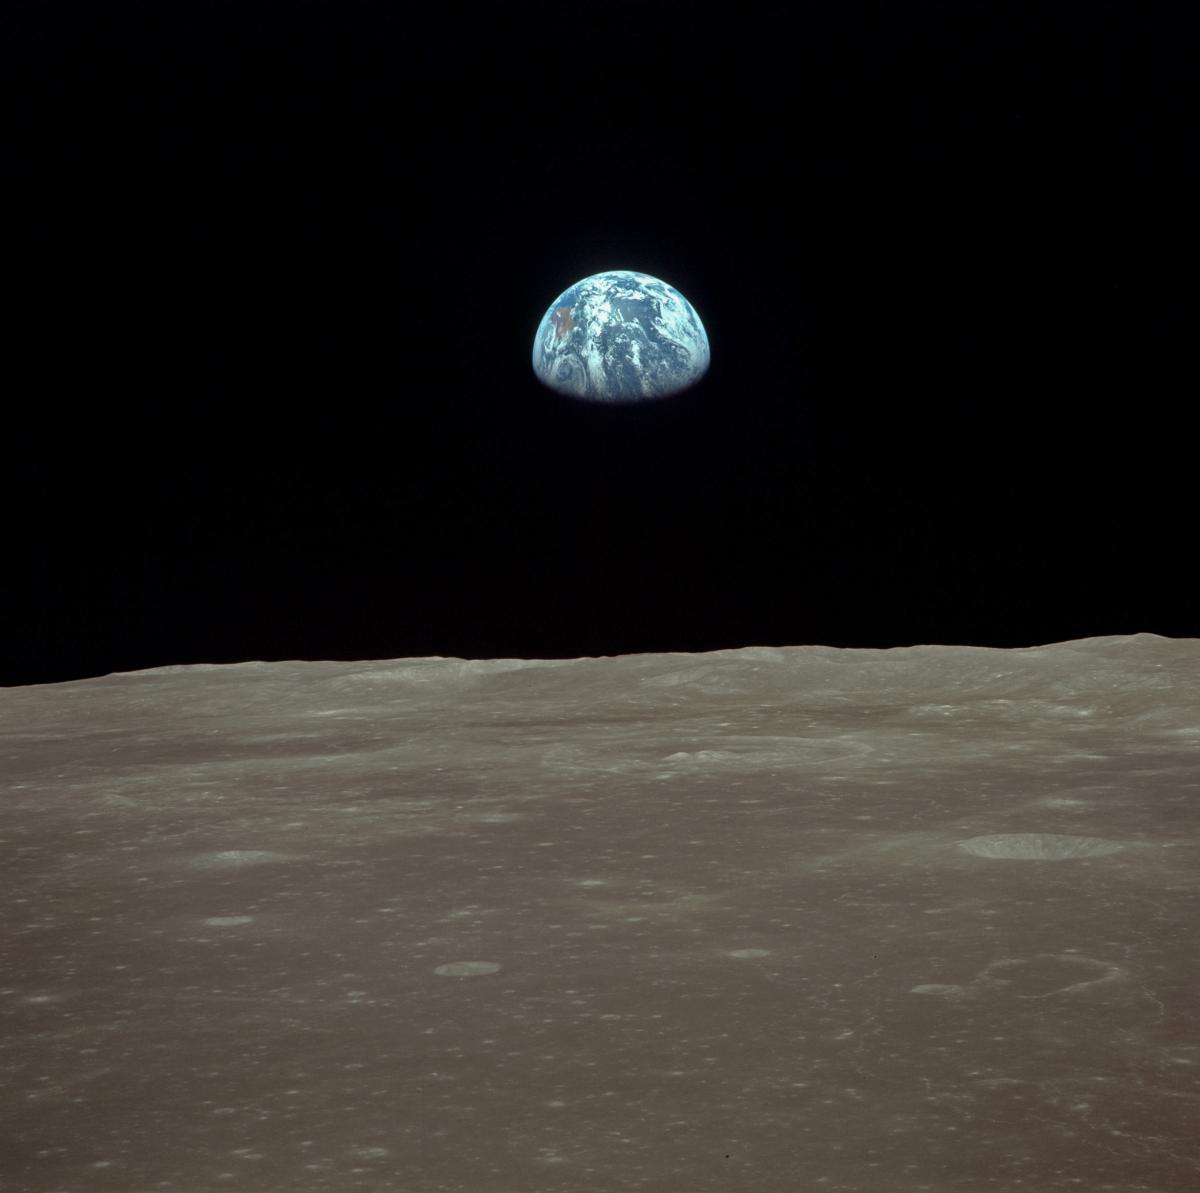 Earthrise seen from Apollo 11